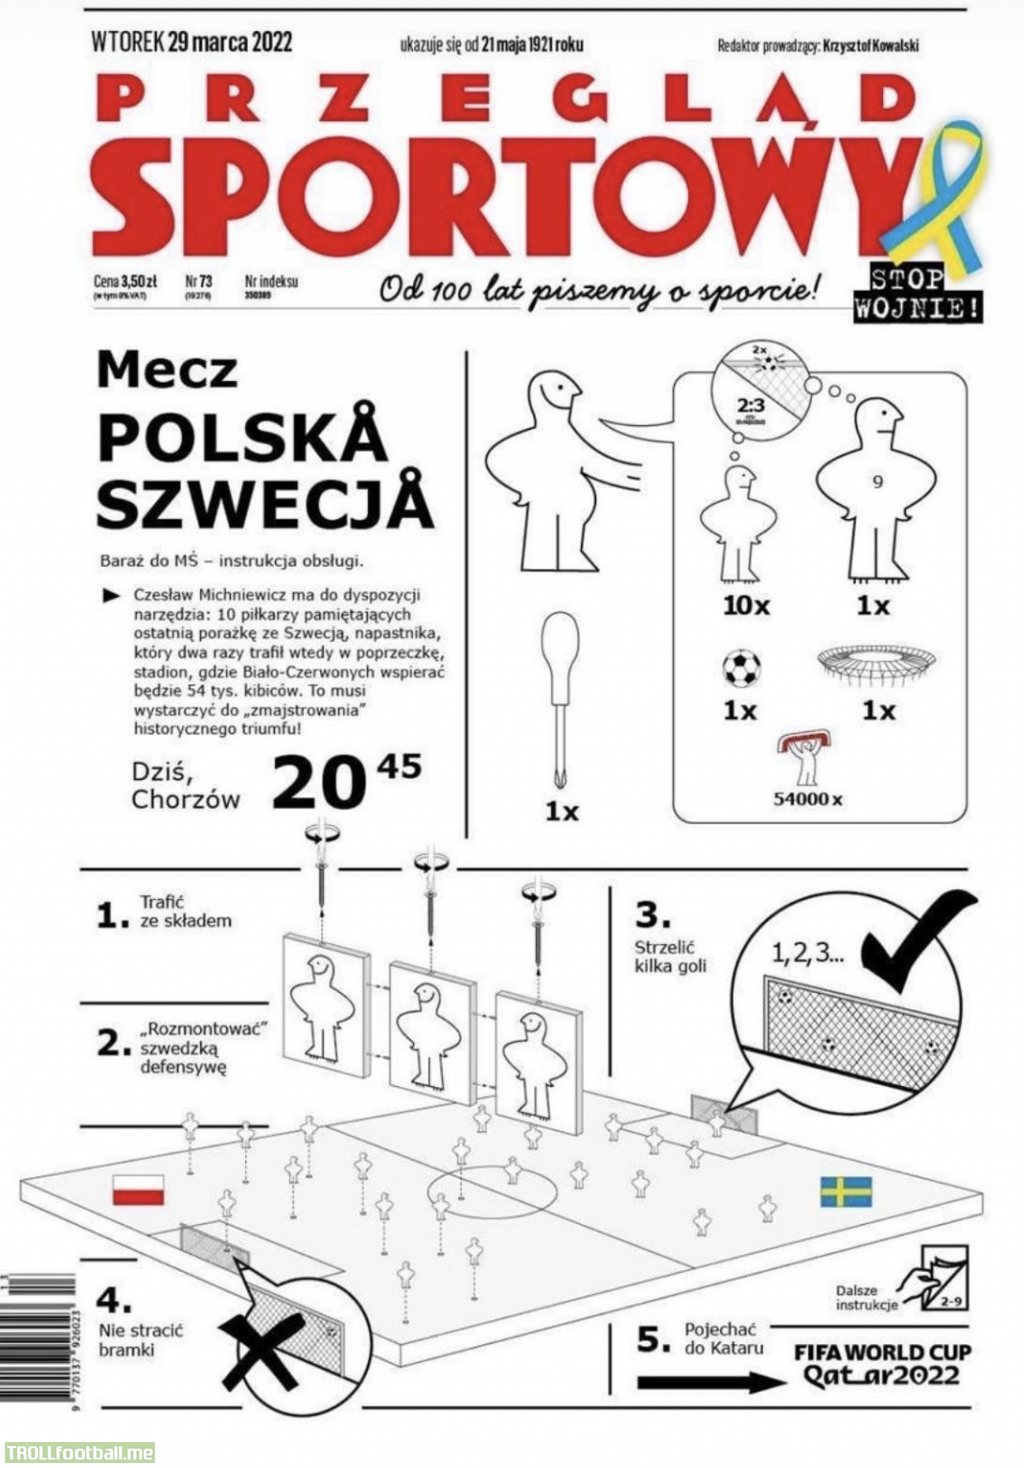 Front page of Przegląd Sportowy (biggest sports newspaper in Poland) prior to the Poland-Sweden play-off